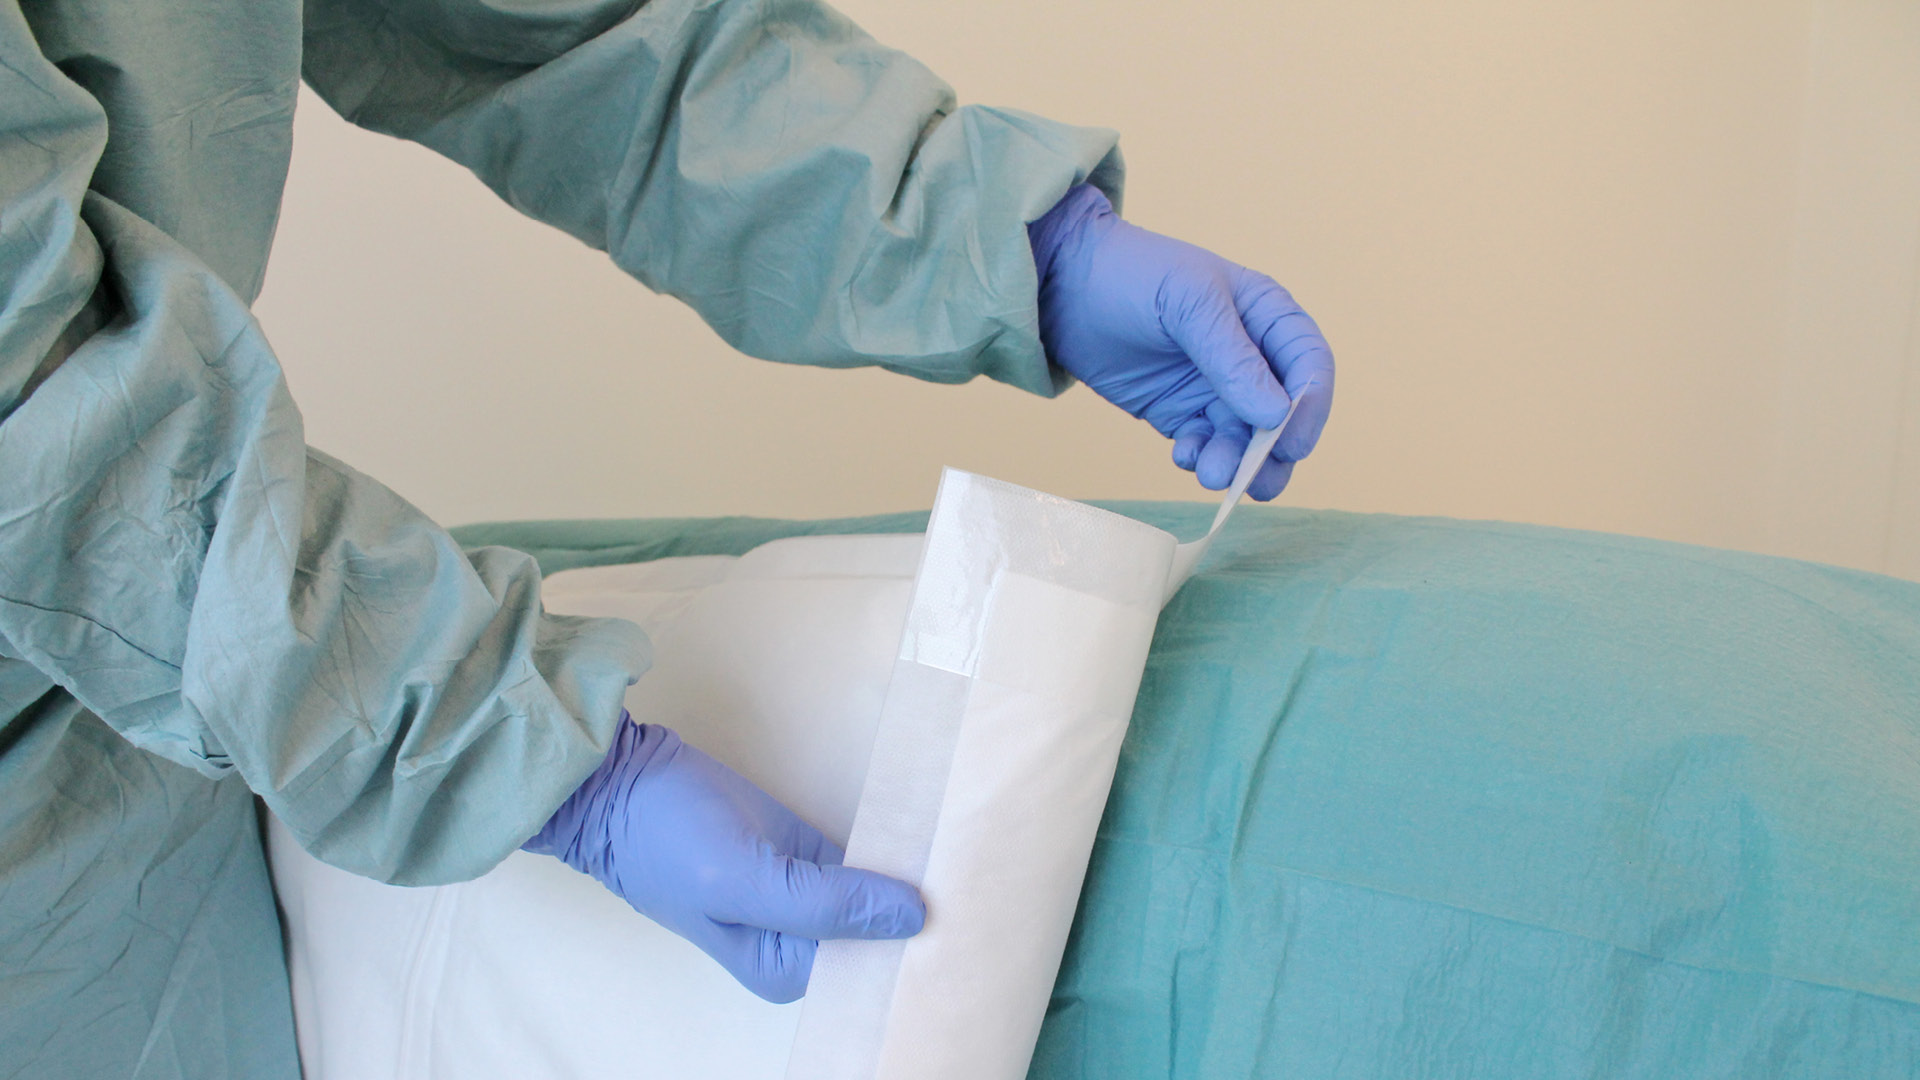 DryMax sterile, absorbent pad for surgery